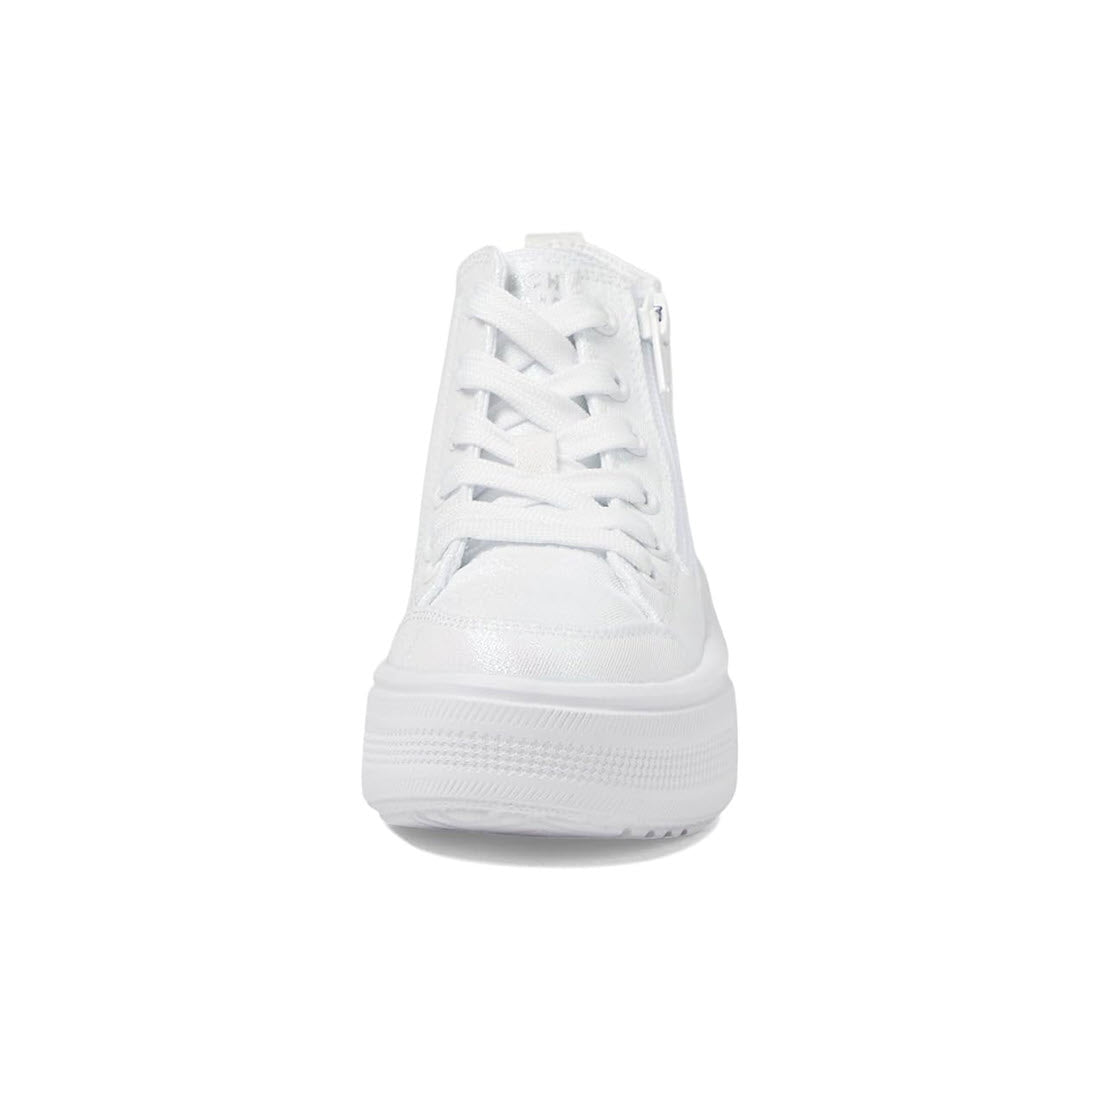 Front view of a Skechers Hyperlift White - Kids high-top fashion sneaker with laced-up white shoelaces on a white background.